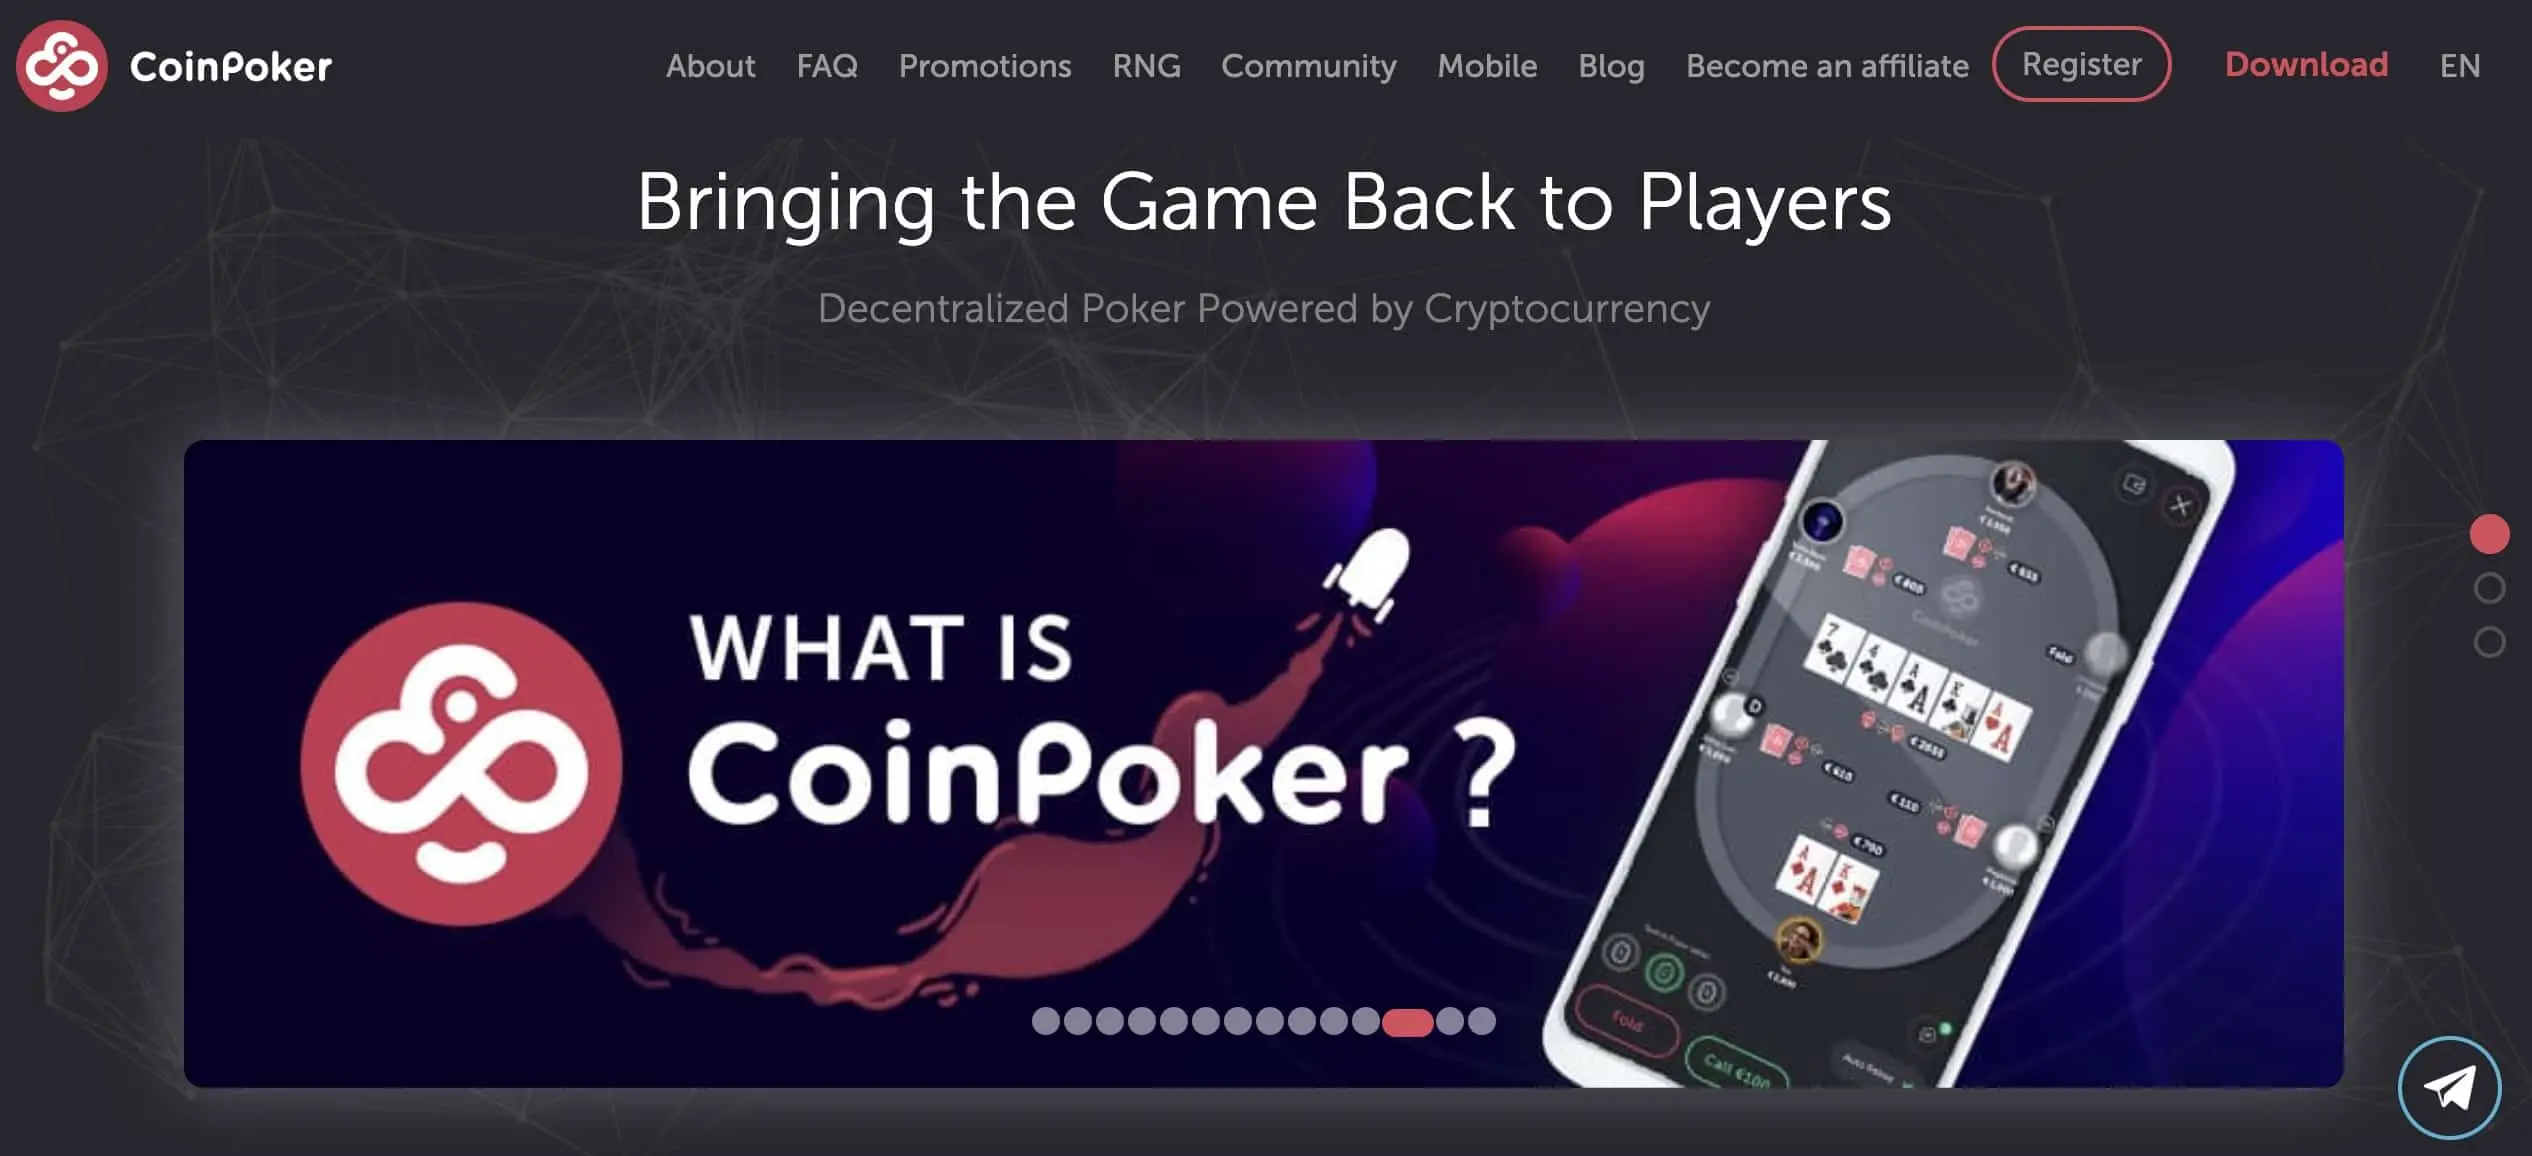 CoinPoker homepage